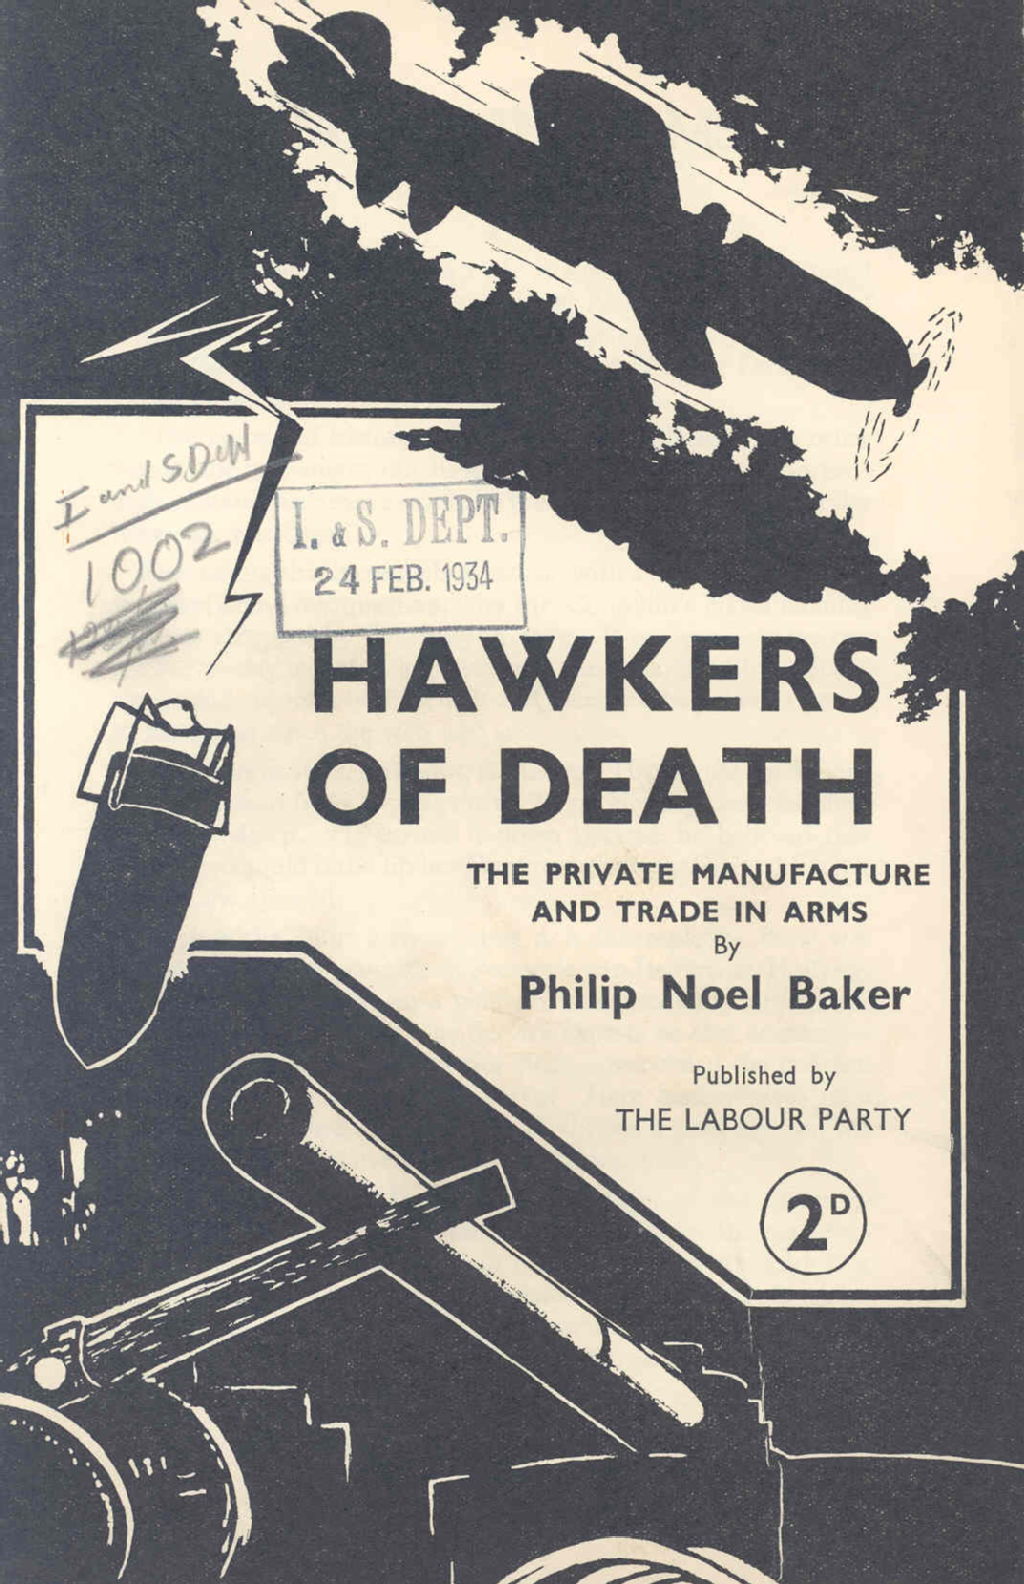 'Hawkers of Death: The private manufacture and trade in arms', January 1934